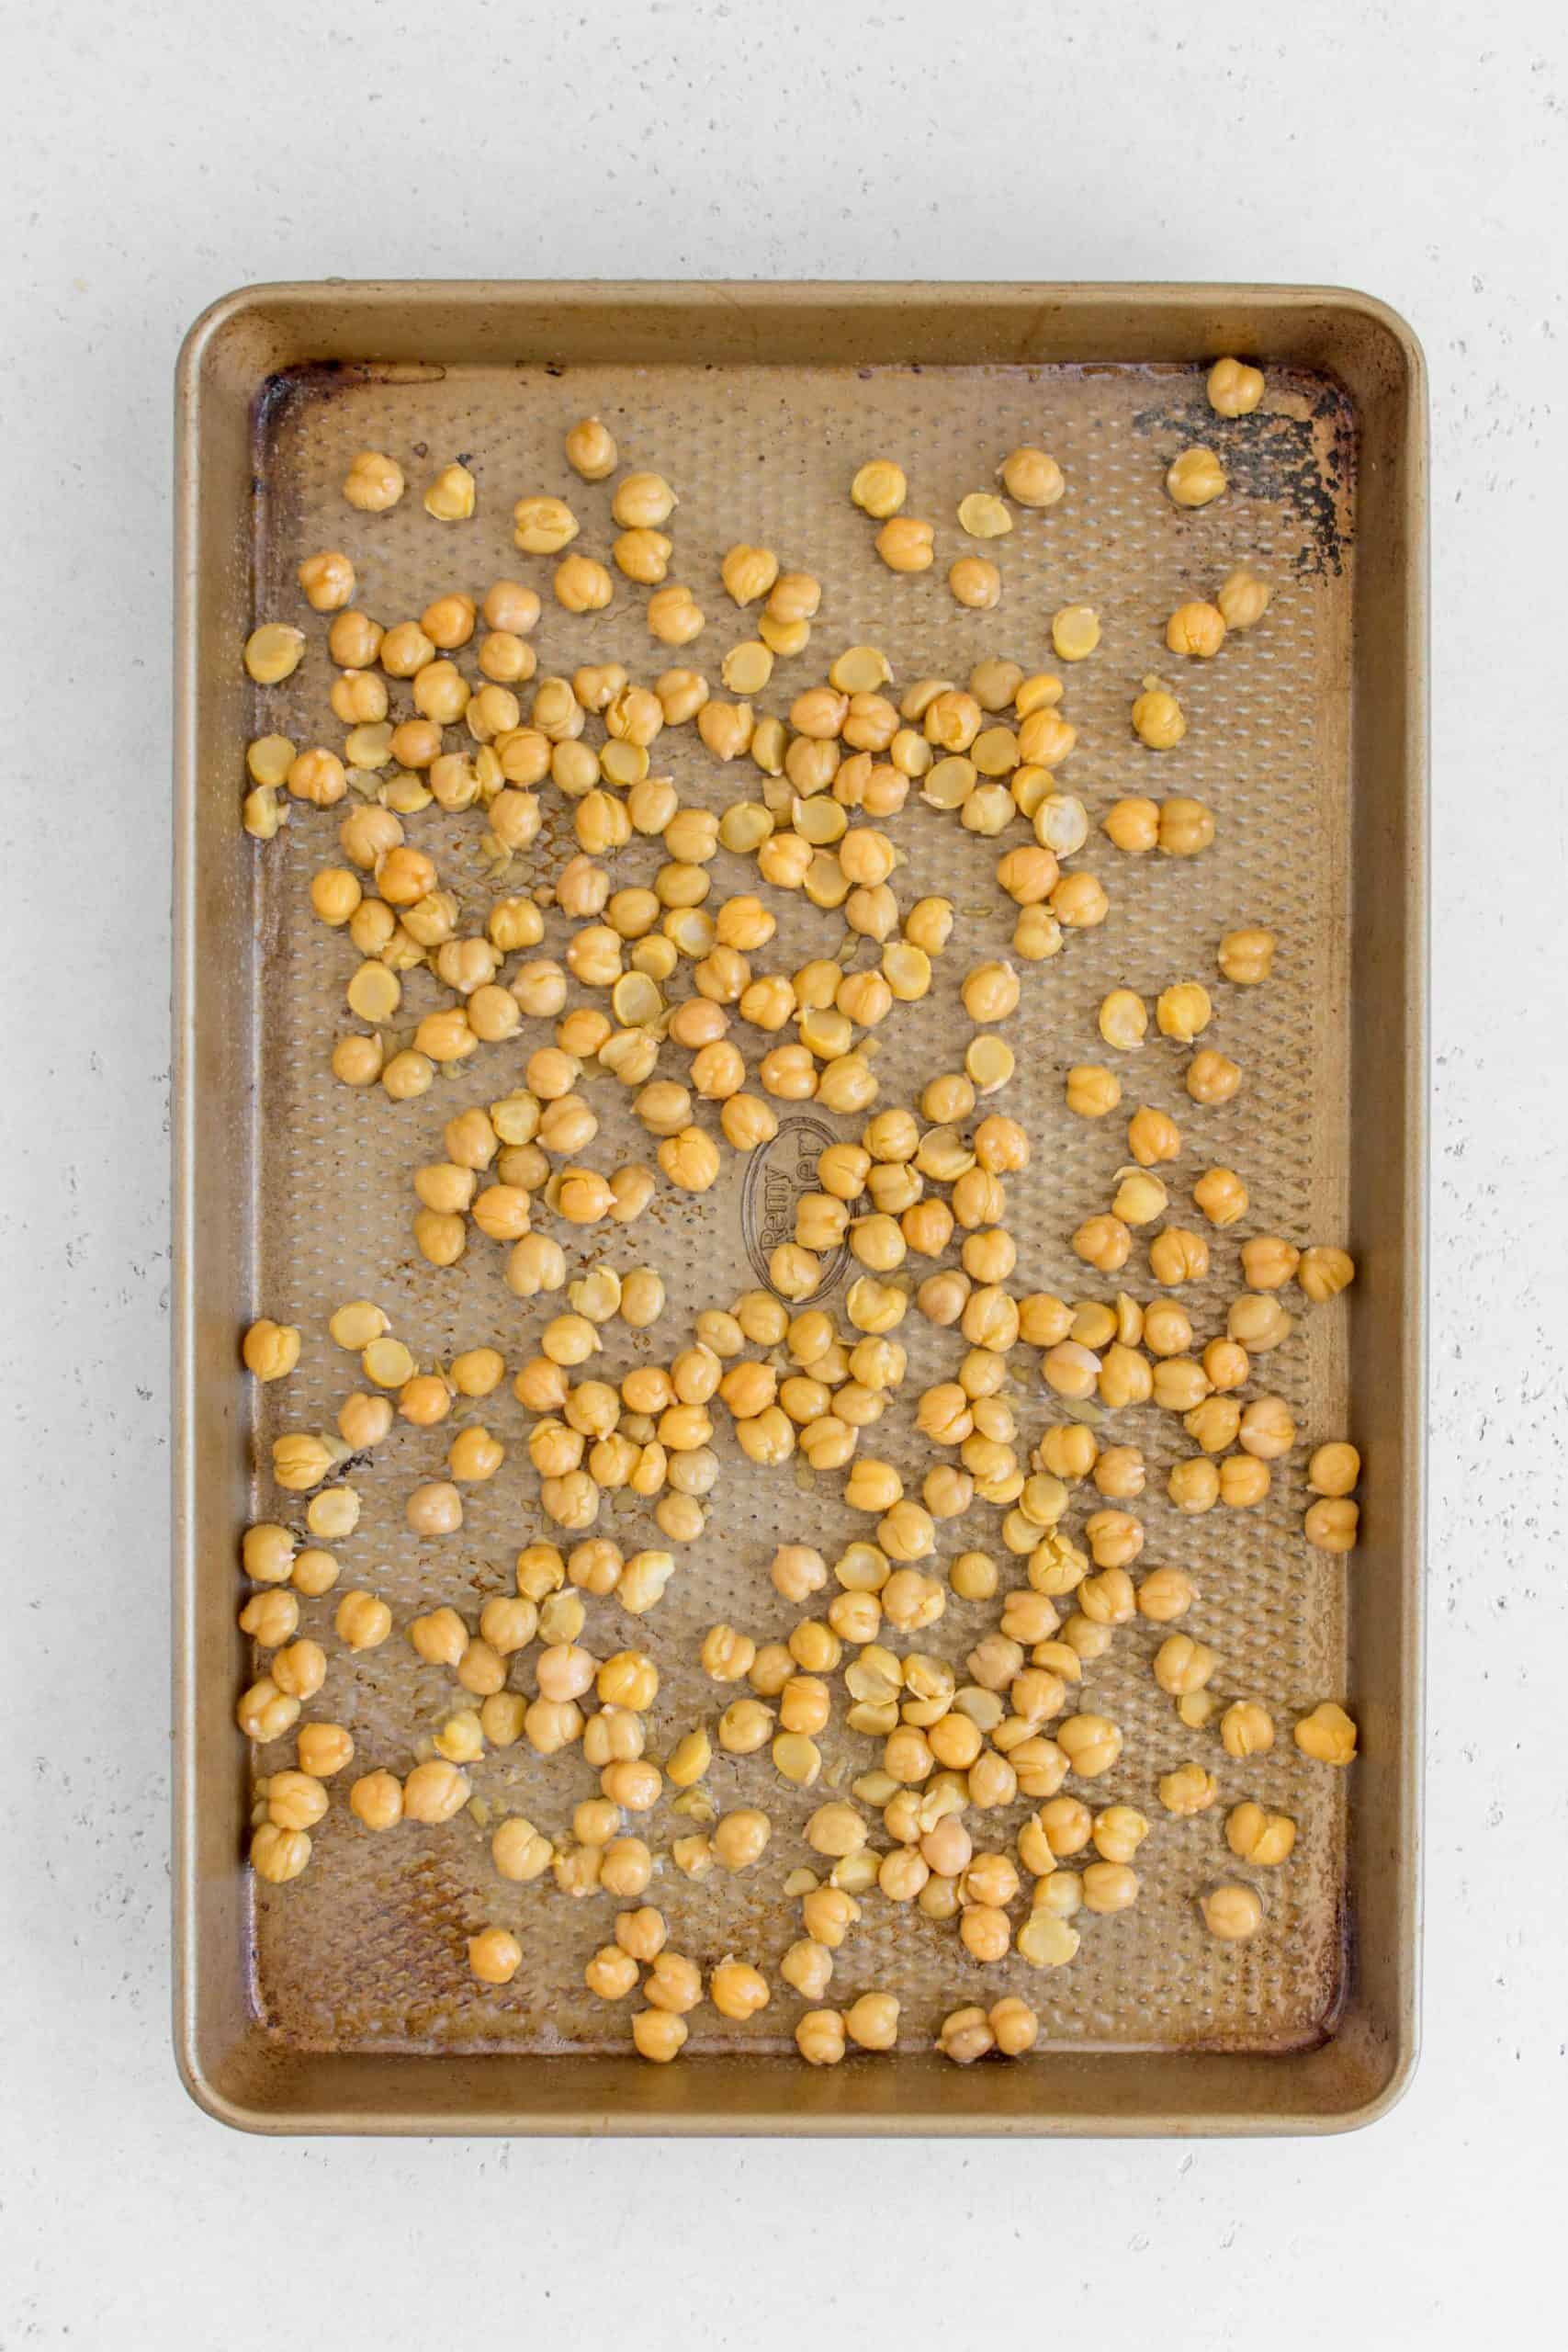 chickpeas on a sheet pan before roasting.